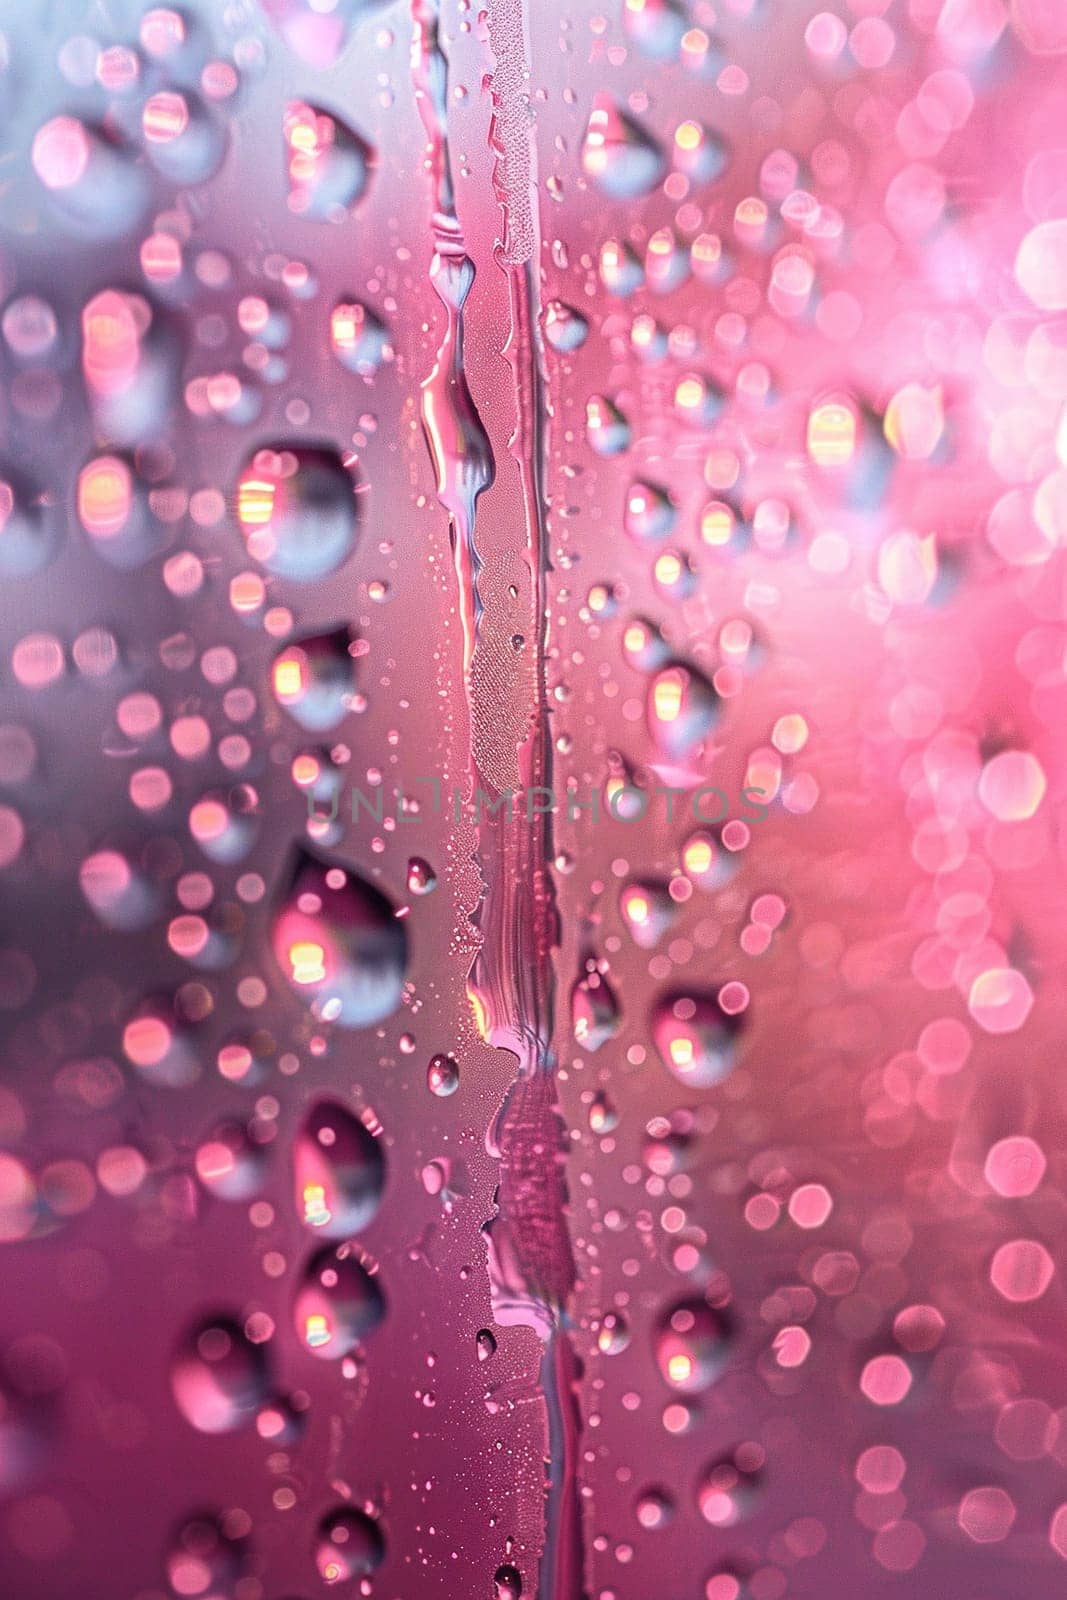 Foggy pink glass with drops and streaks of water. Vertical background for tik tok, instagram, stories. Generated by artificial intelligence by Vovmar